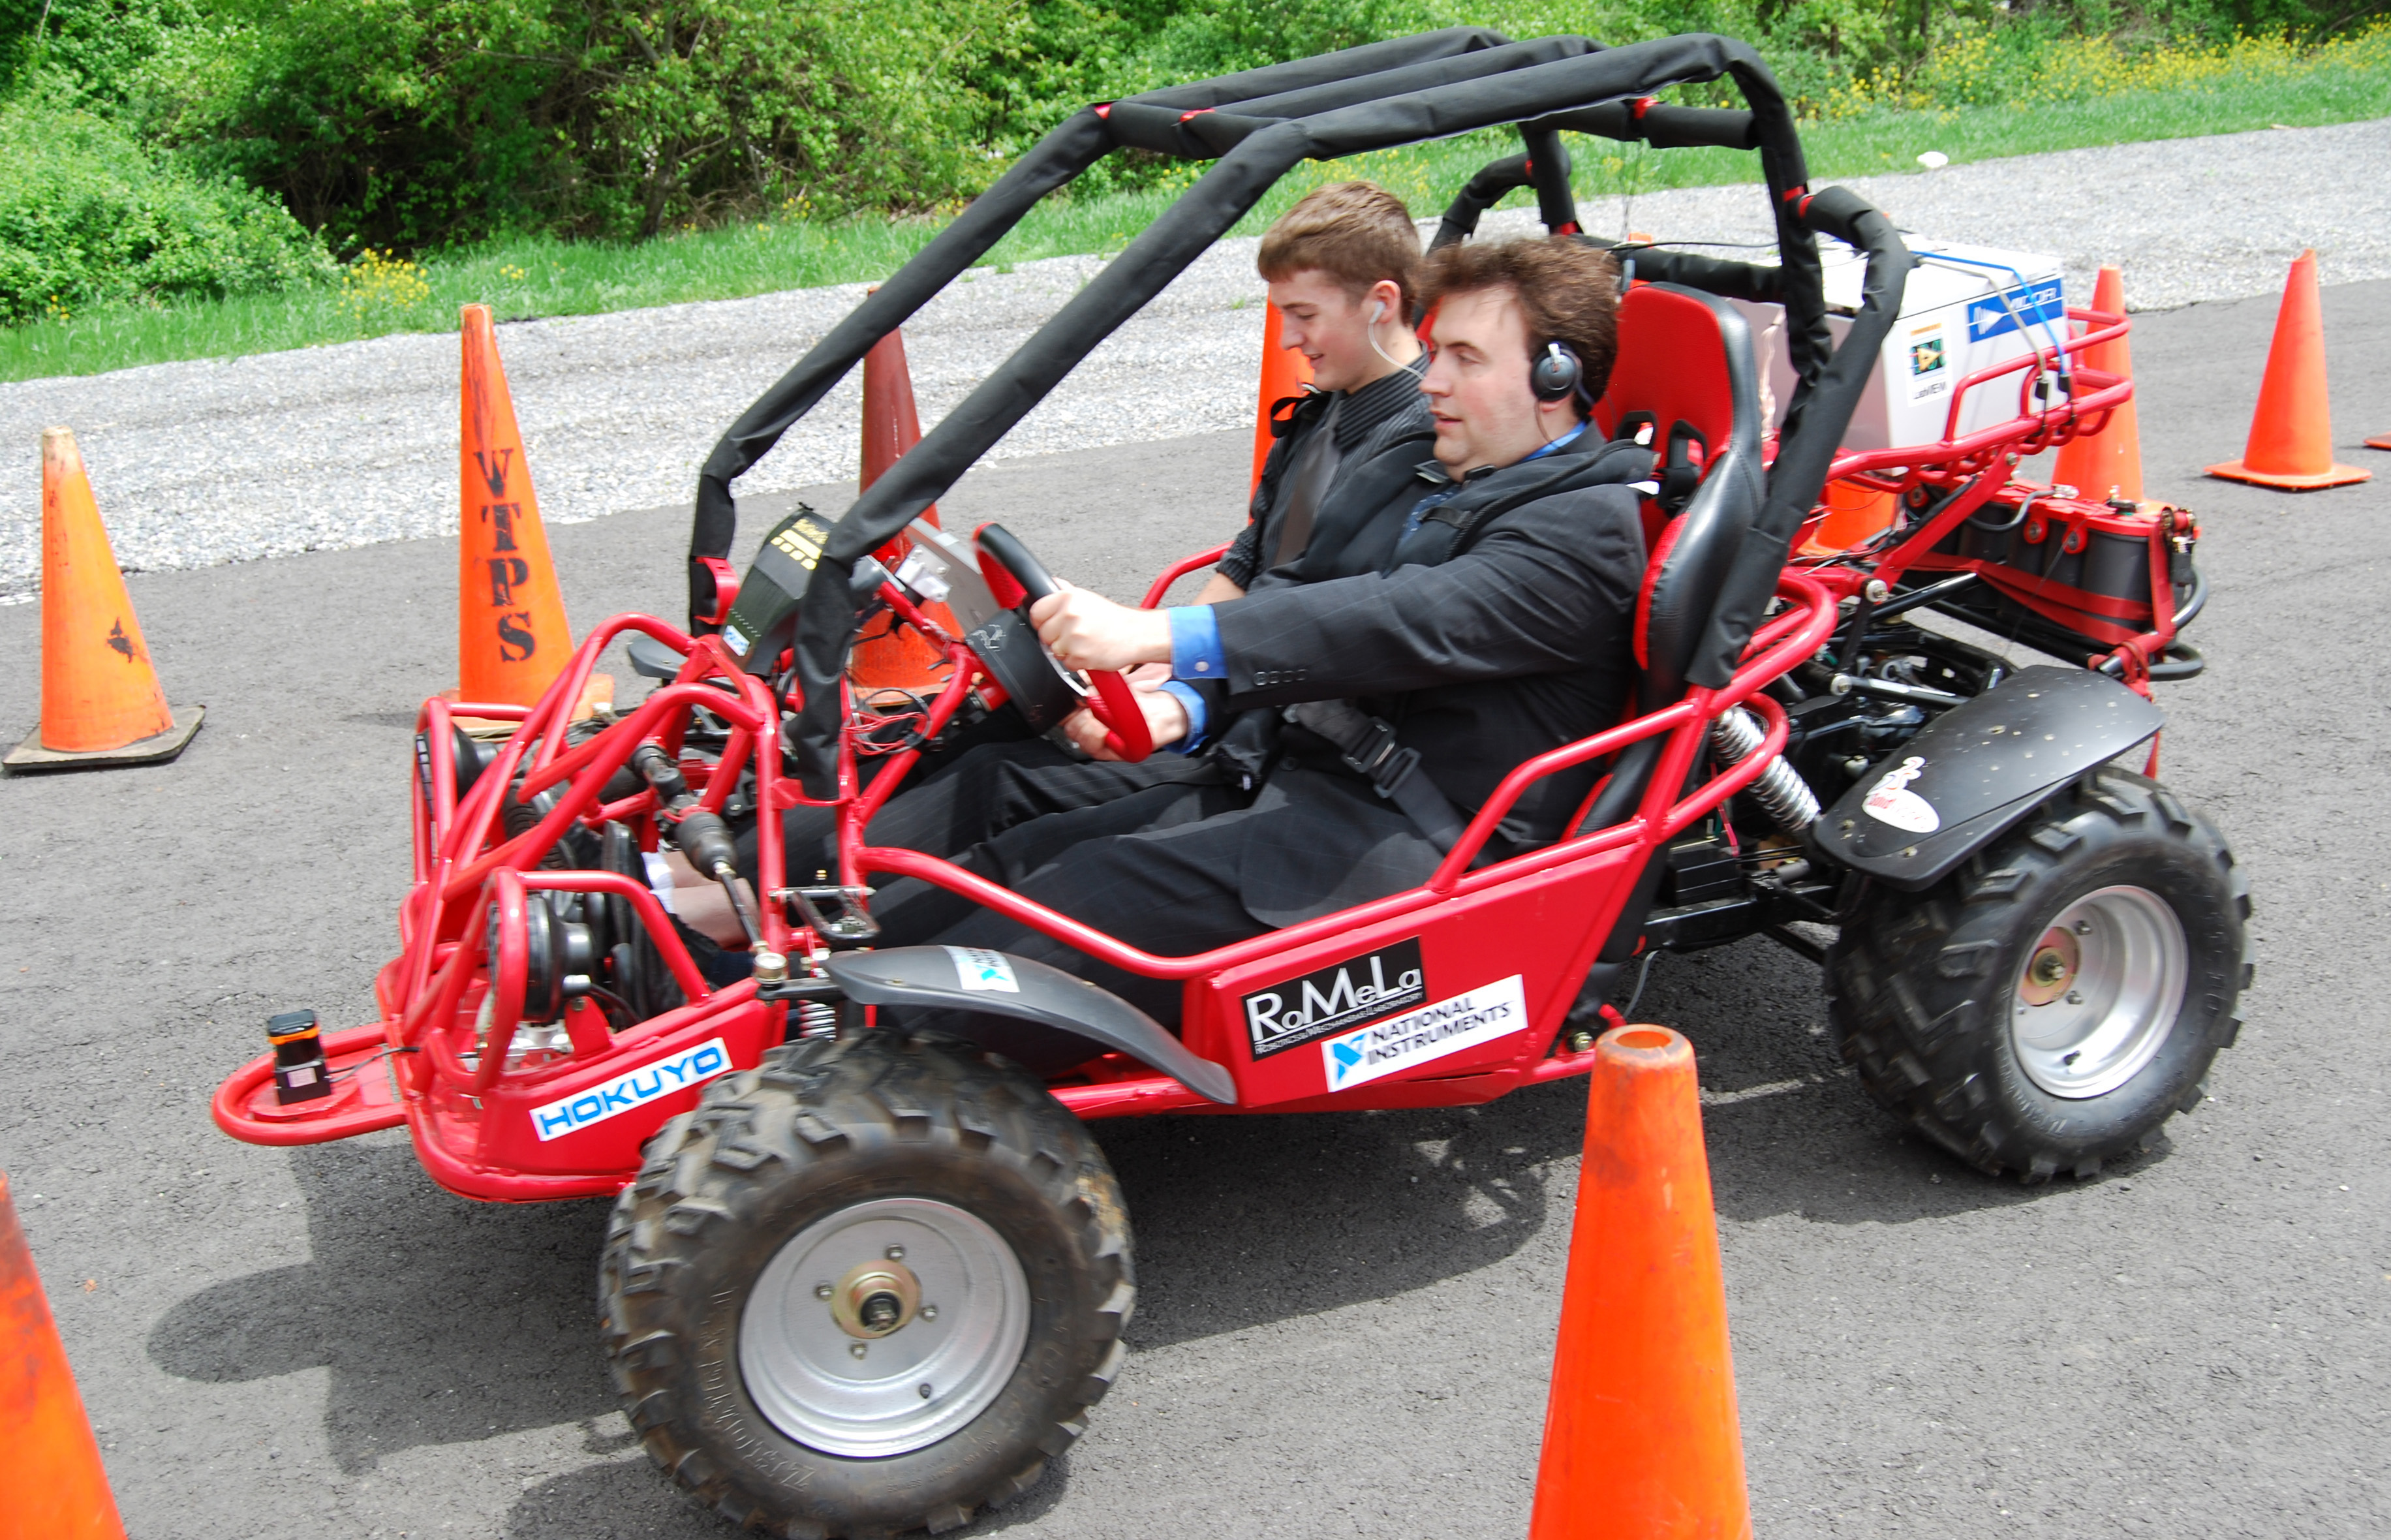 Mark Riccobono, executive director of the National Federation of the Blind's Jernigan Institute, drives the Virginia Tech Blind Driver Challenge vehicle through an obstacle course of traffic cones on a campus parking lot. In the passenger seat is Greg Jannaman, who led the student team within the mechanical engineering department during the past year, and is monitoring the software of the vehicle..